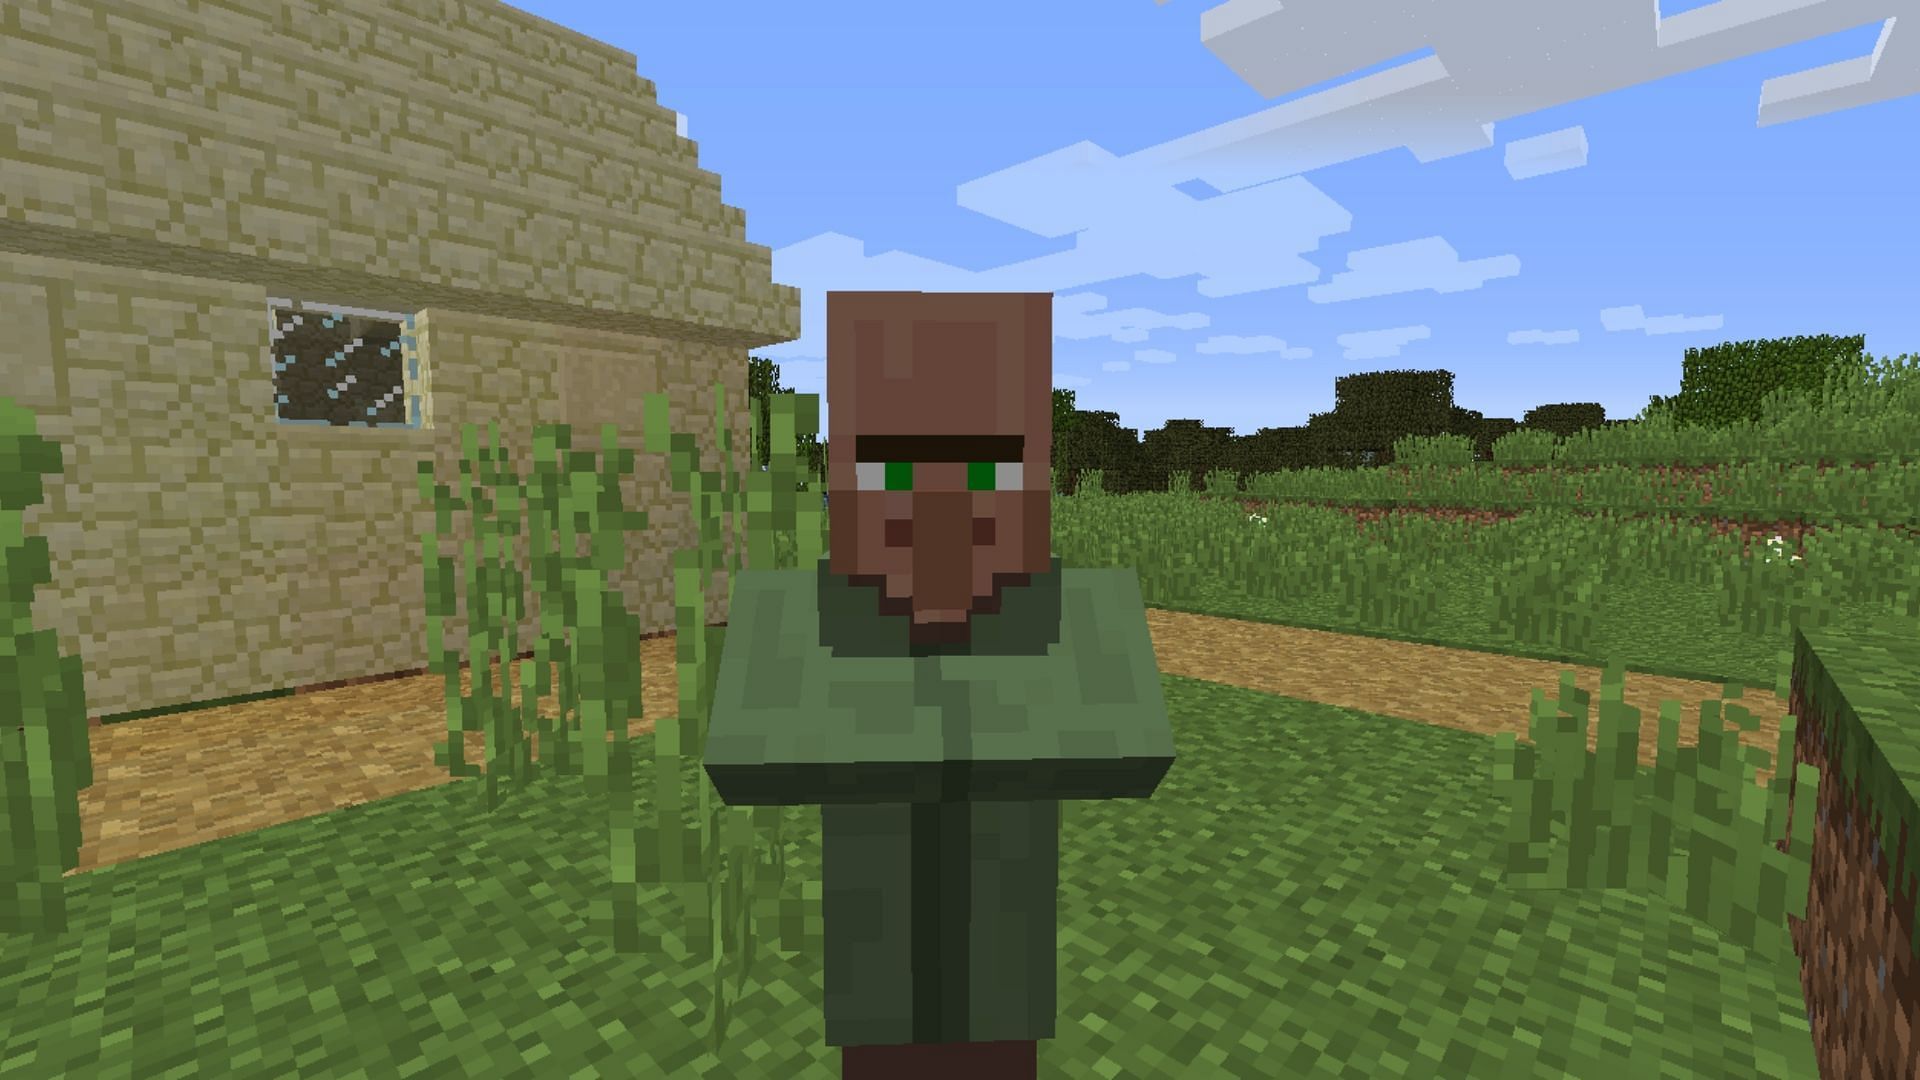 Nitwits are unique variants of villagers in Minecraft (Image via Minecraft Forum)